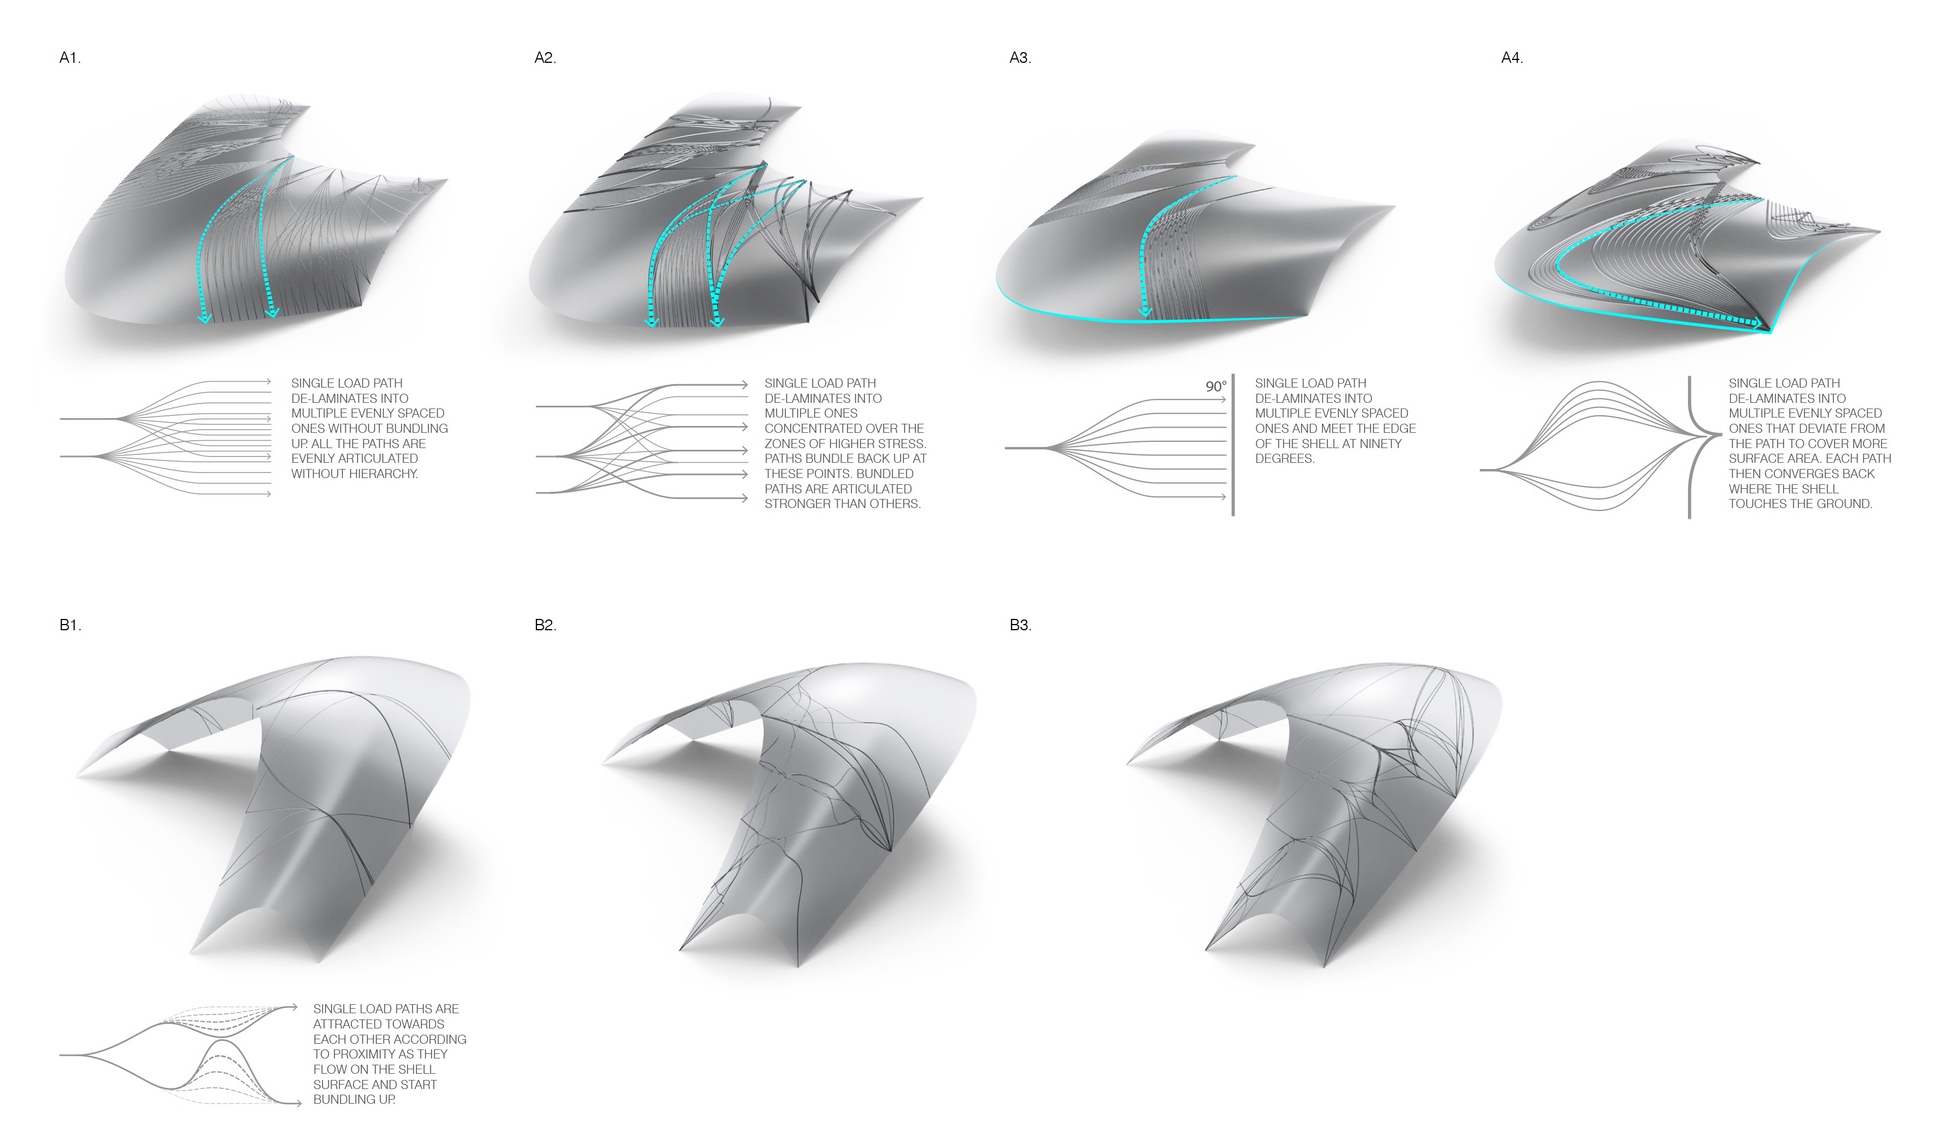  The transition between the perimeter compression shells and the central tensile members was developed through a number of articulation studies, taking methods of bundling and structural paths active on the shells into account. 